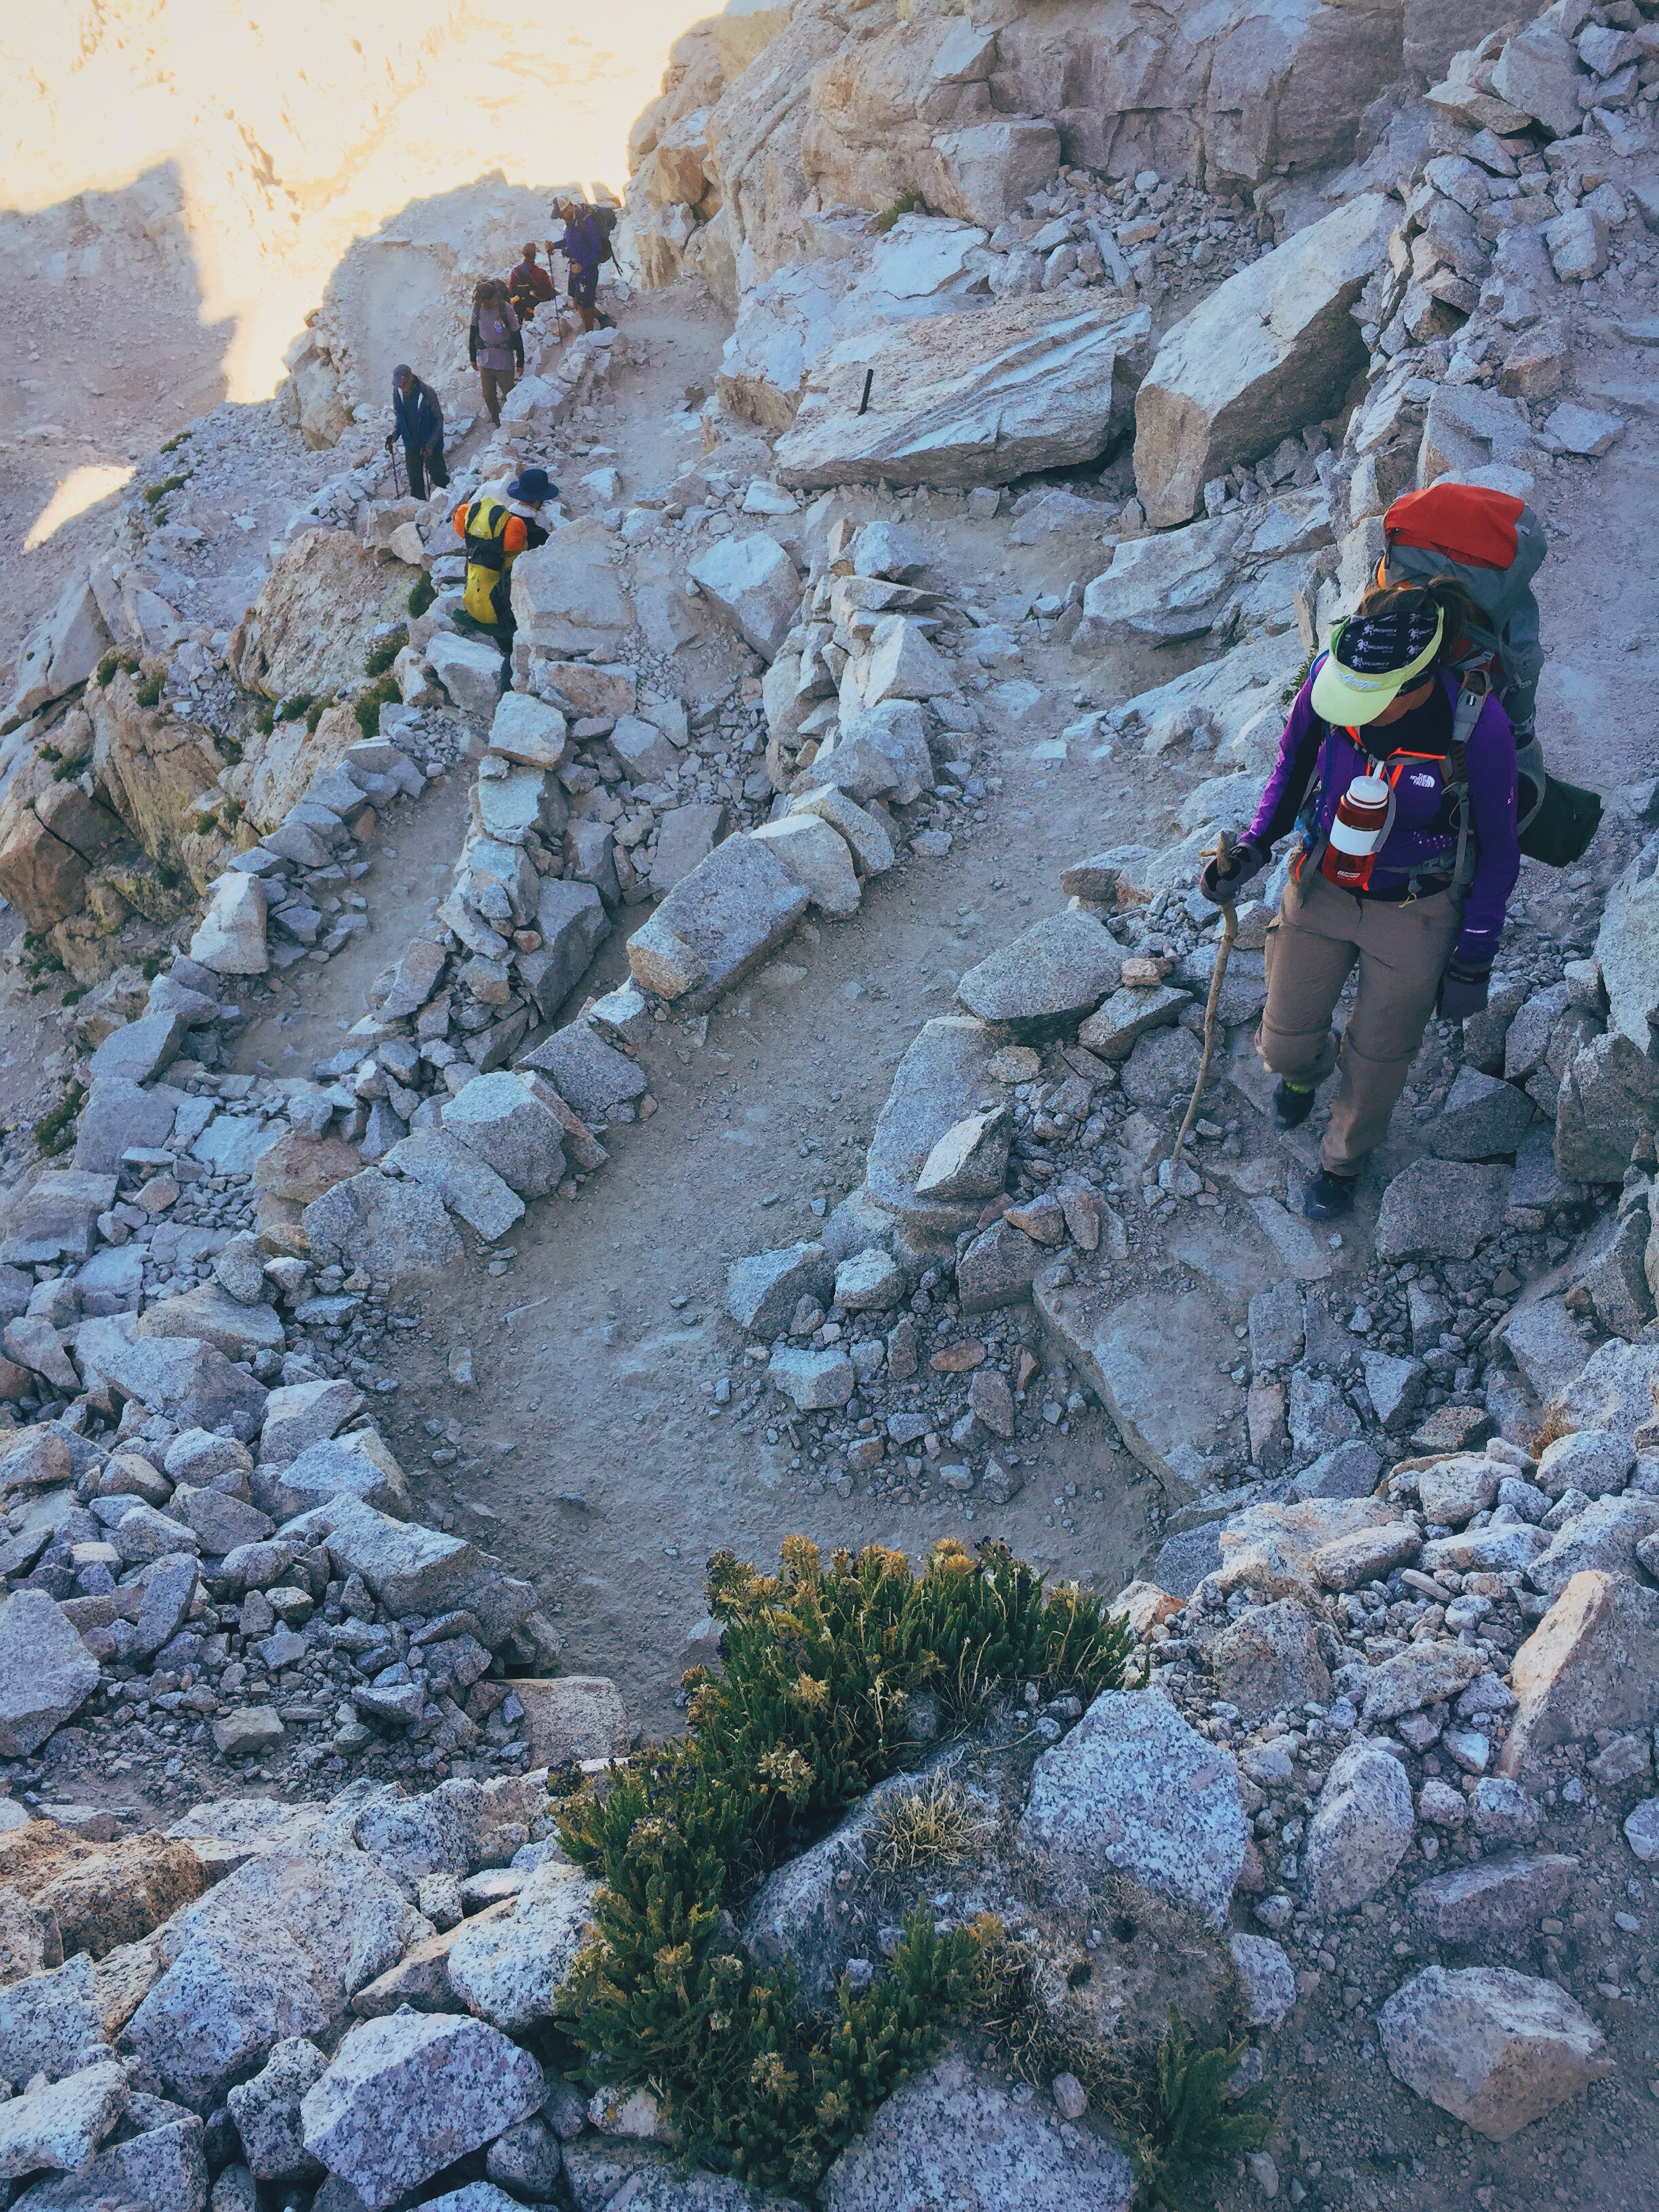  A section of the notorious "99 switchbacks" on the trail toward Whitney Portal. Genevieve was teaching us to count to 99 in French. 